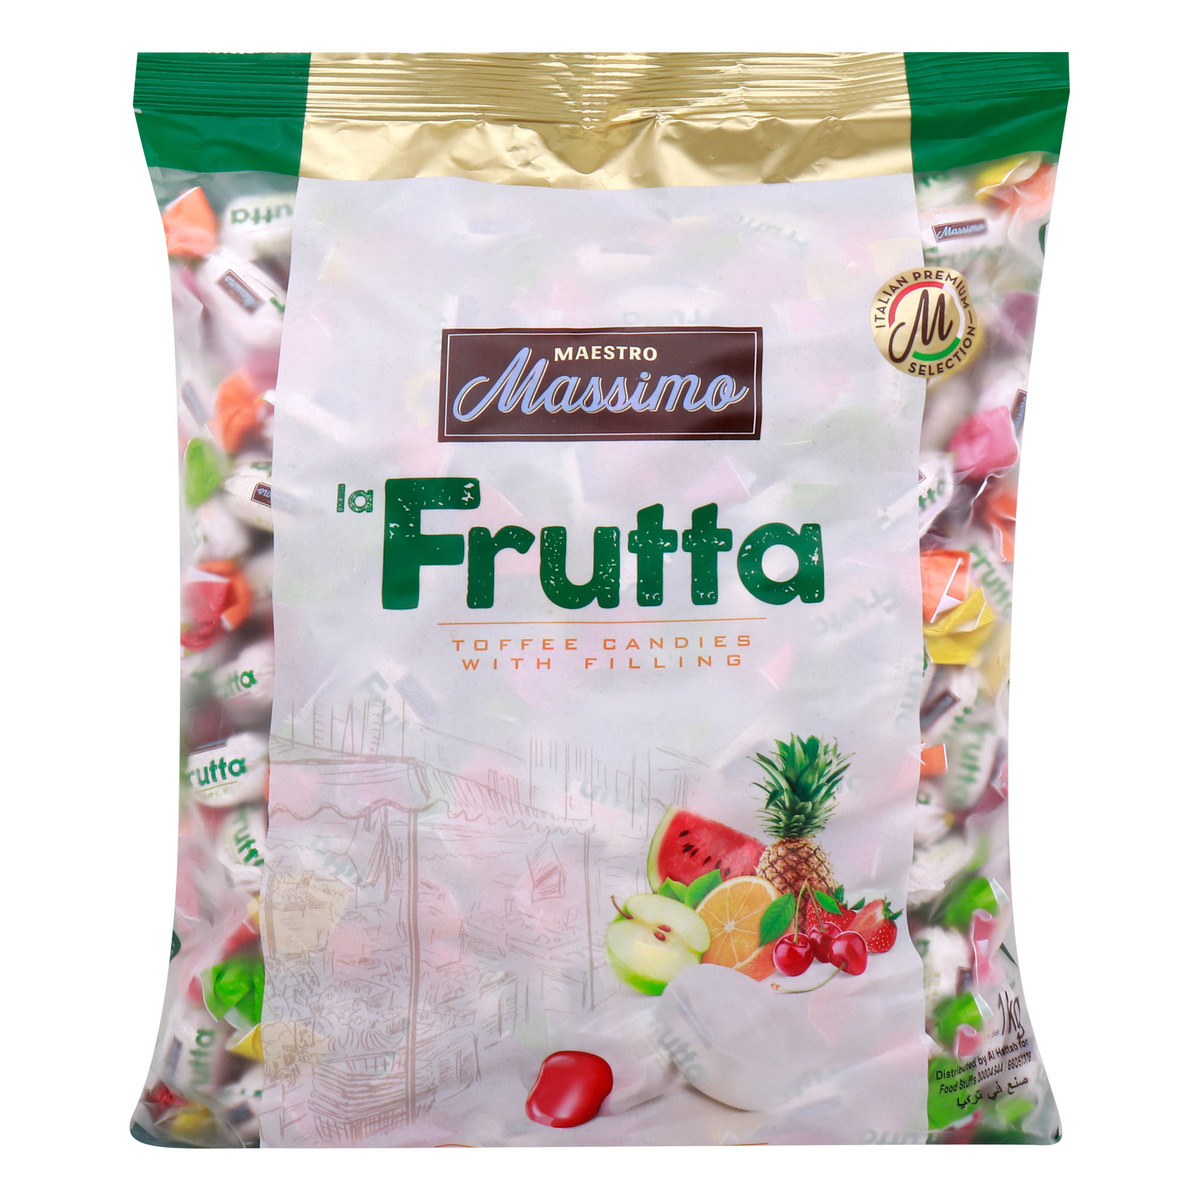 Maestro Massimo La Fruta Toffee Candies with Filling, Mixed Fruits, 1 kg